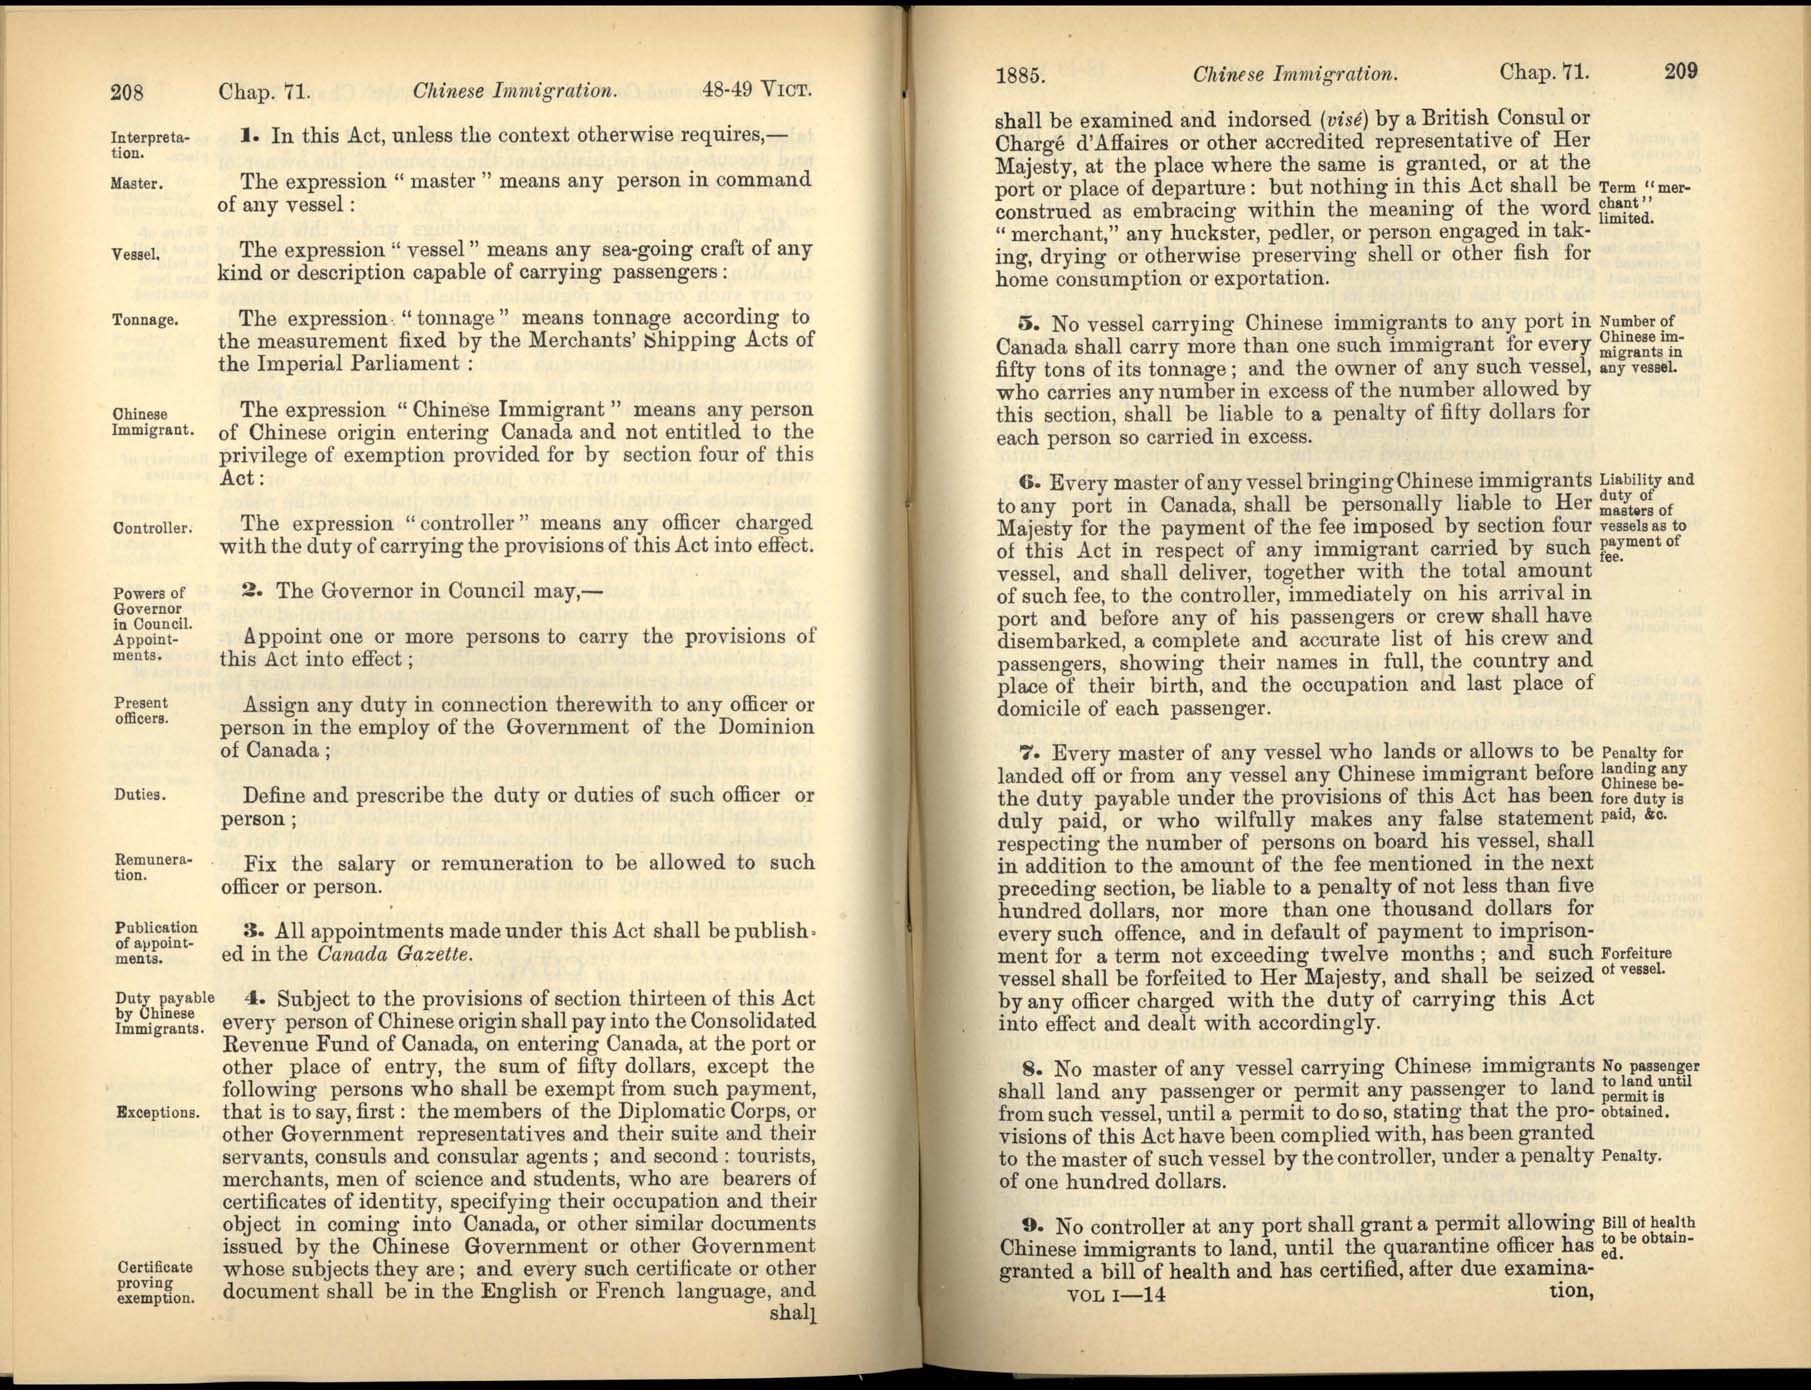 Page 208, 209 The Chinese Immigration Act, 1885